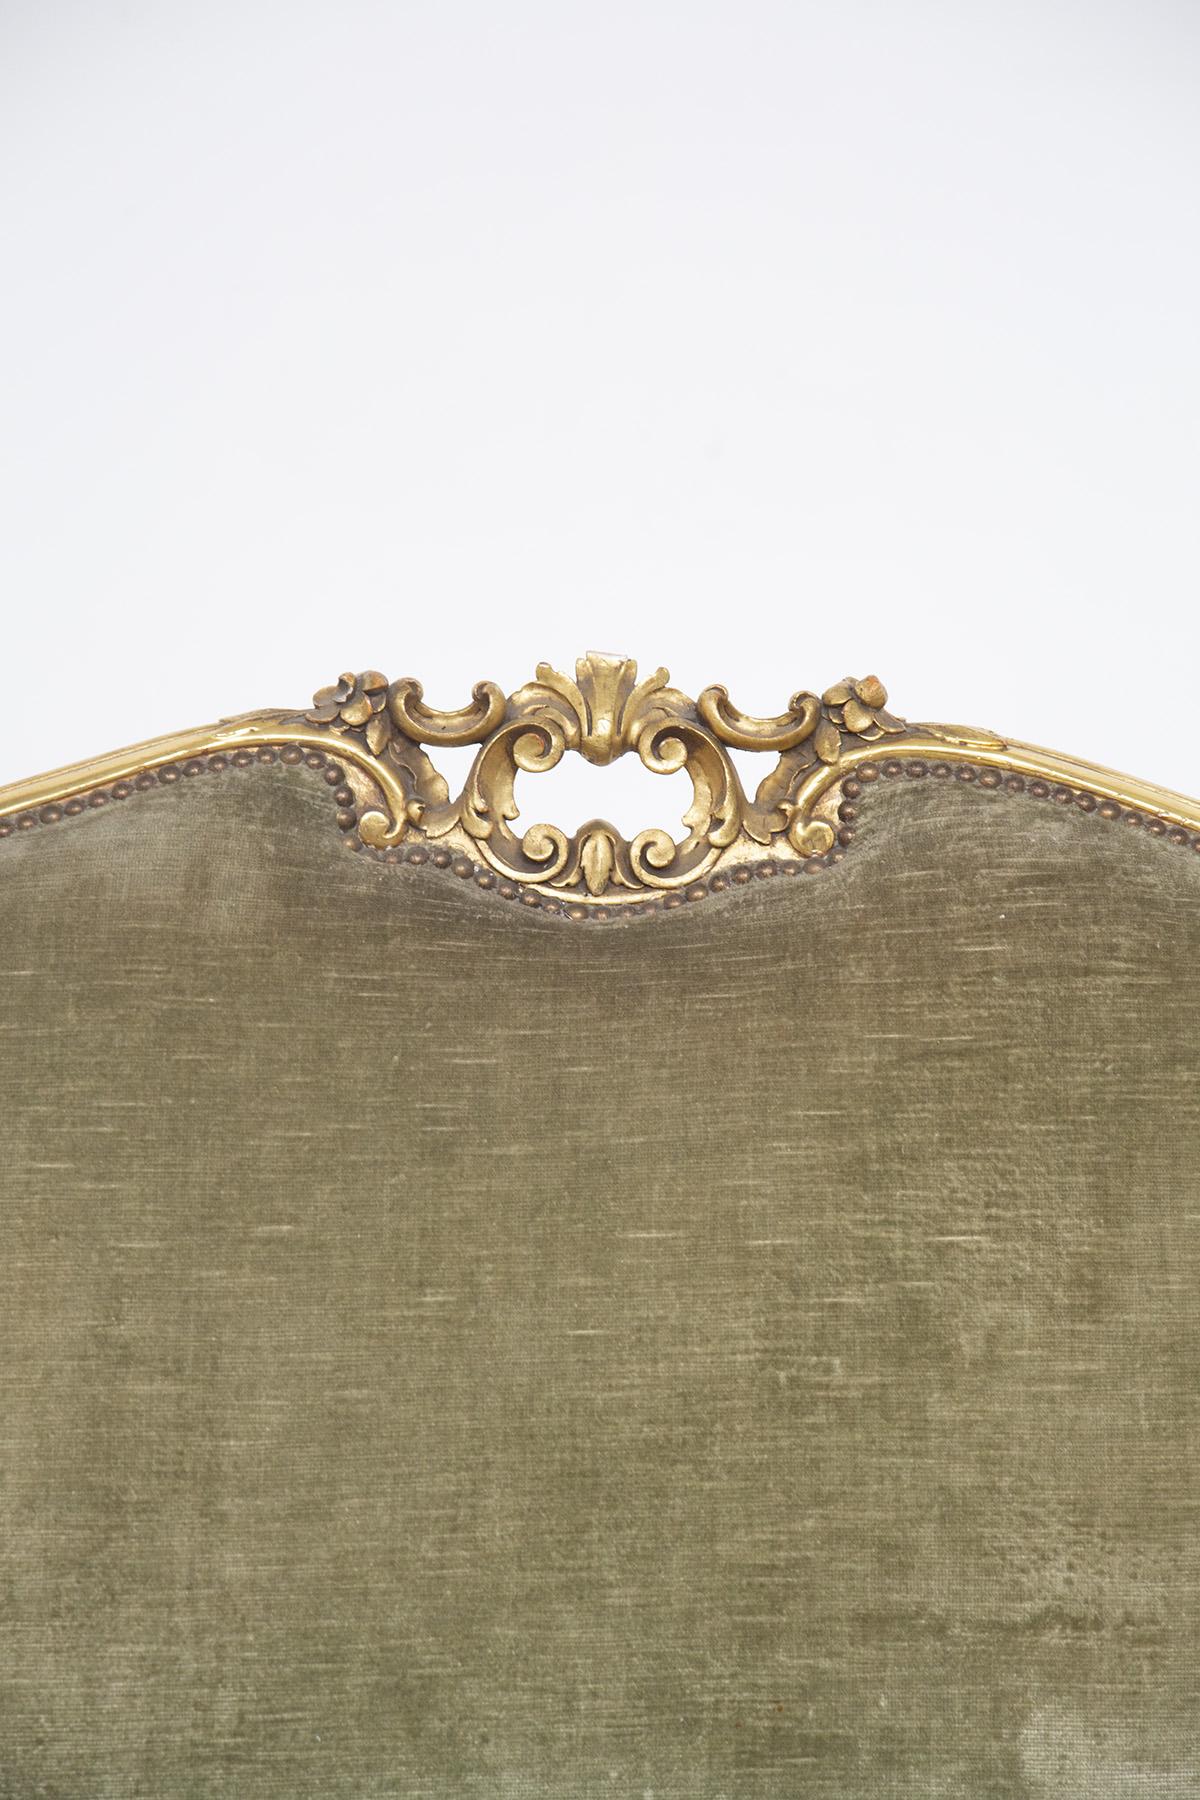 The vintage sofa is in Louis XVI style and it is of fine Italian manufacture from the early 1900s. The large sofa has three seats and it’s upholstered in the beautiful original green velvet. The gilded wood is decorated with curs and details typical